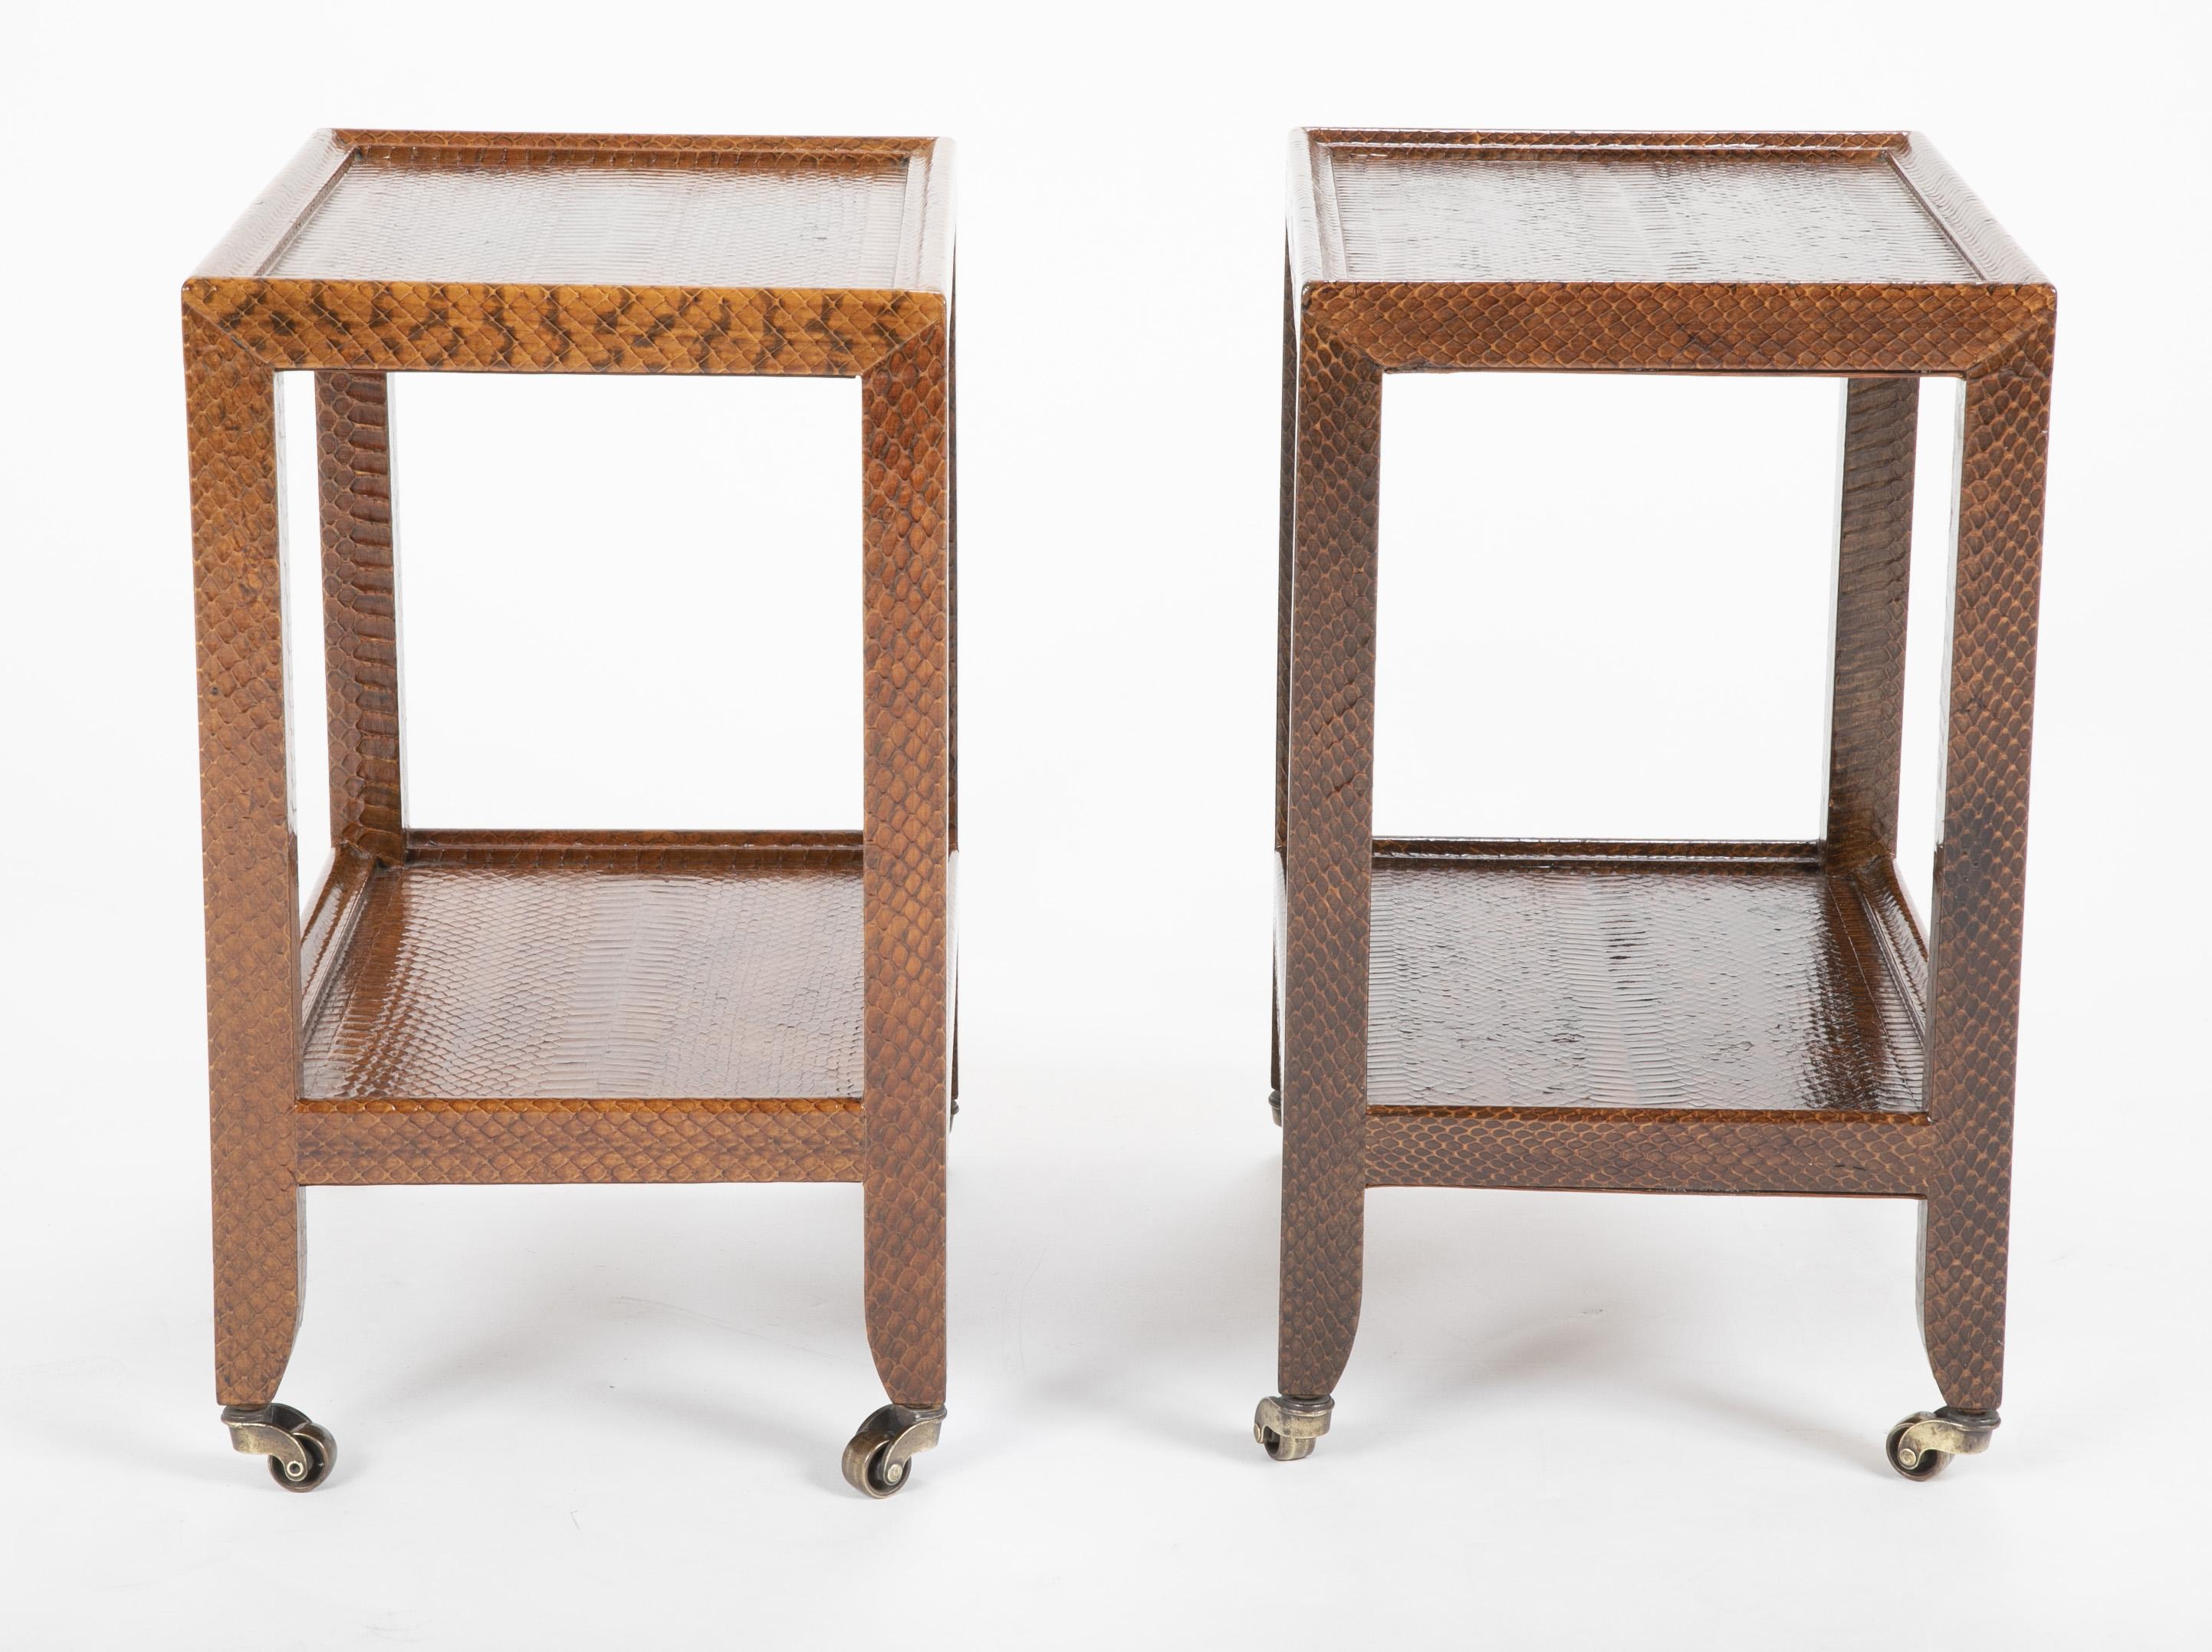 Pair of Karl Springer Snake Skin Two-Tier Side Tables In Good Condition For Sale In Stamford, CT